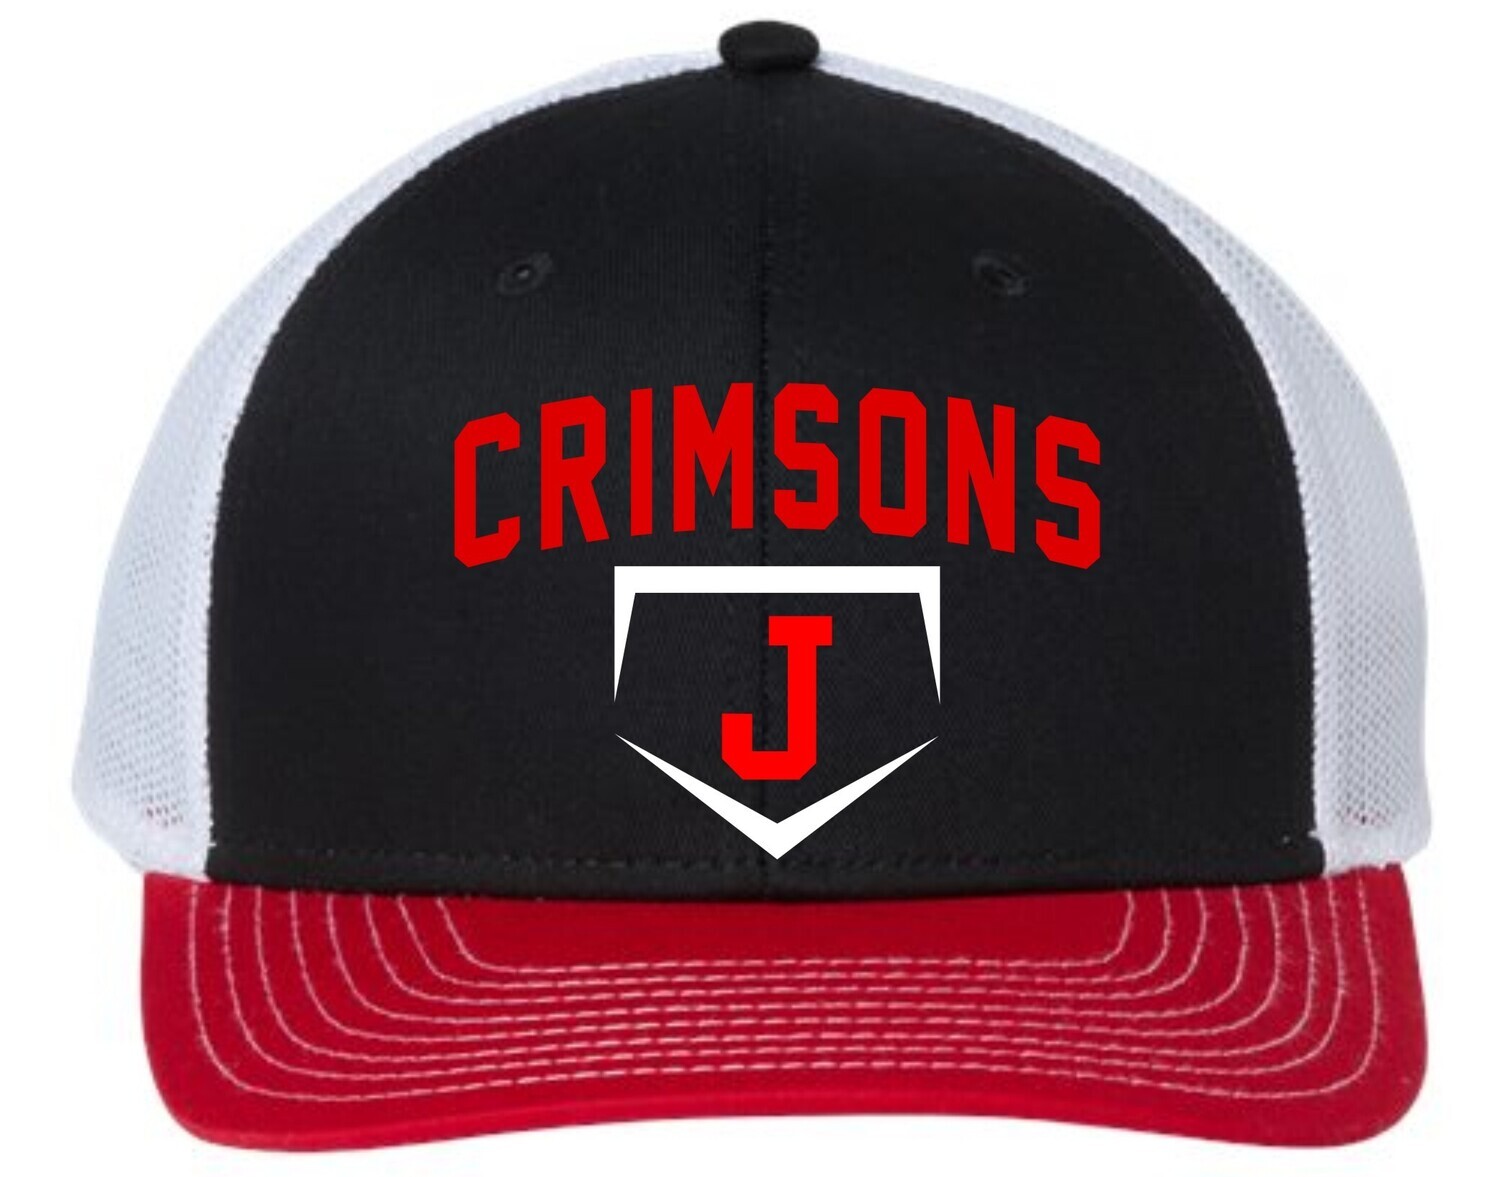 JHS BASEBALL-G452E BLACK/RED (EMBROIDERED)